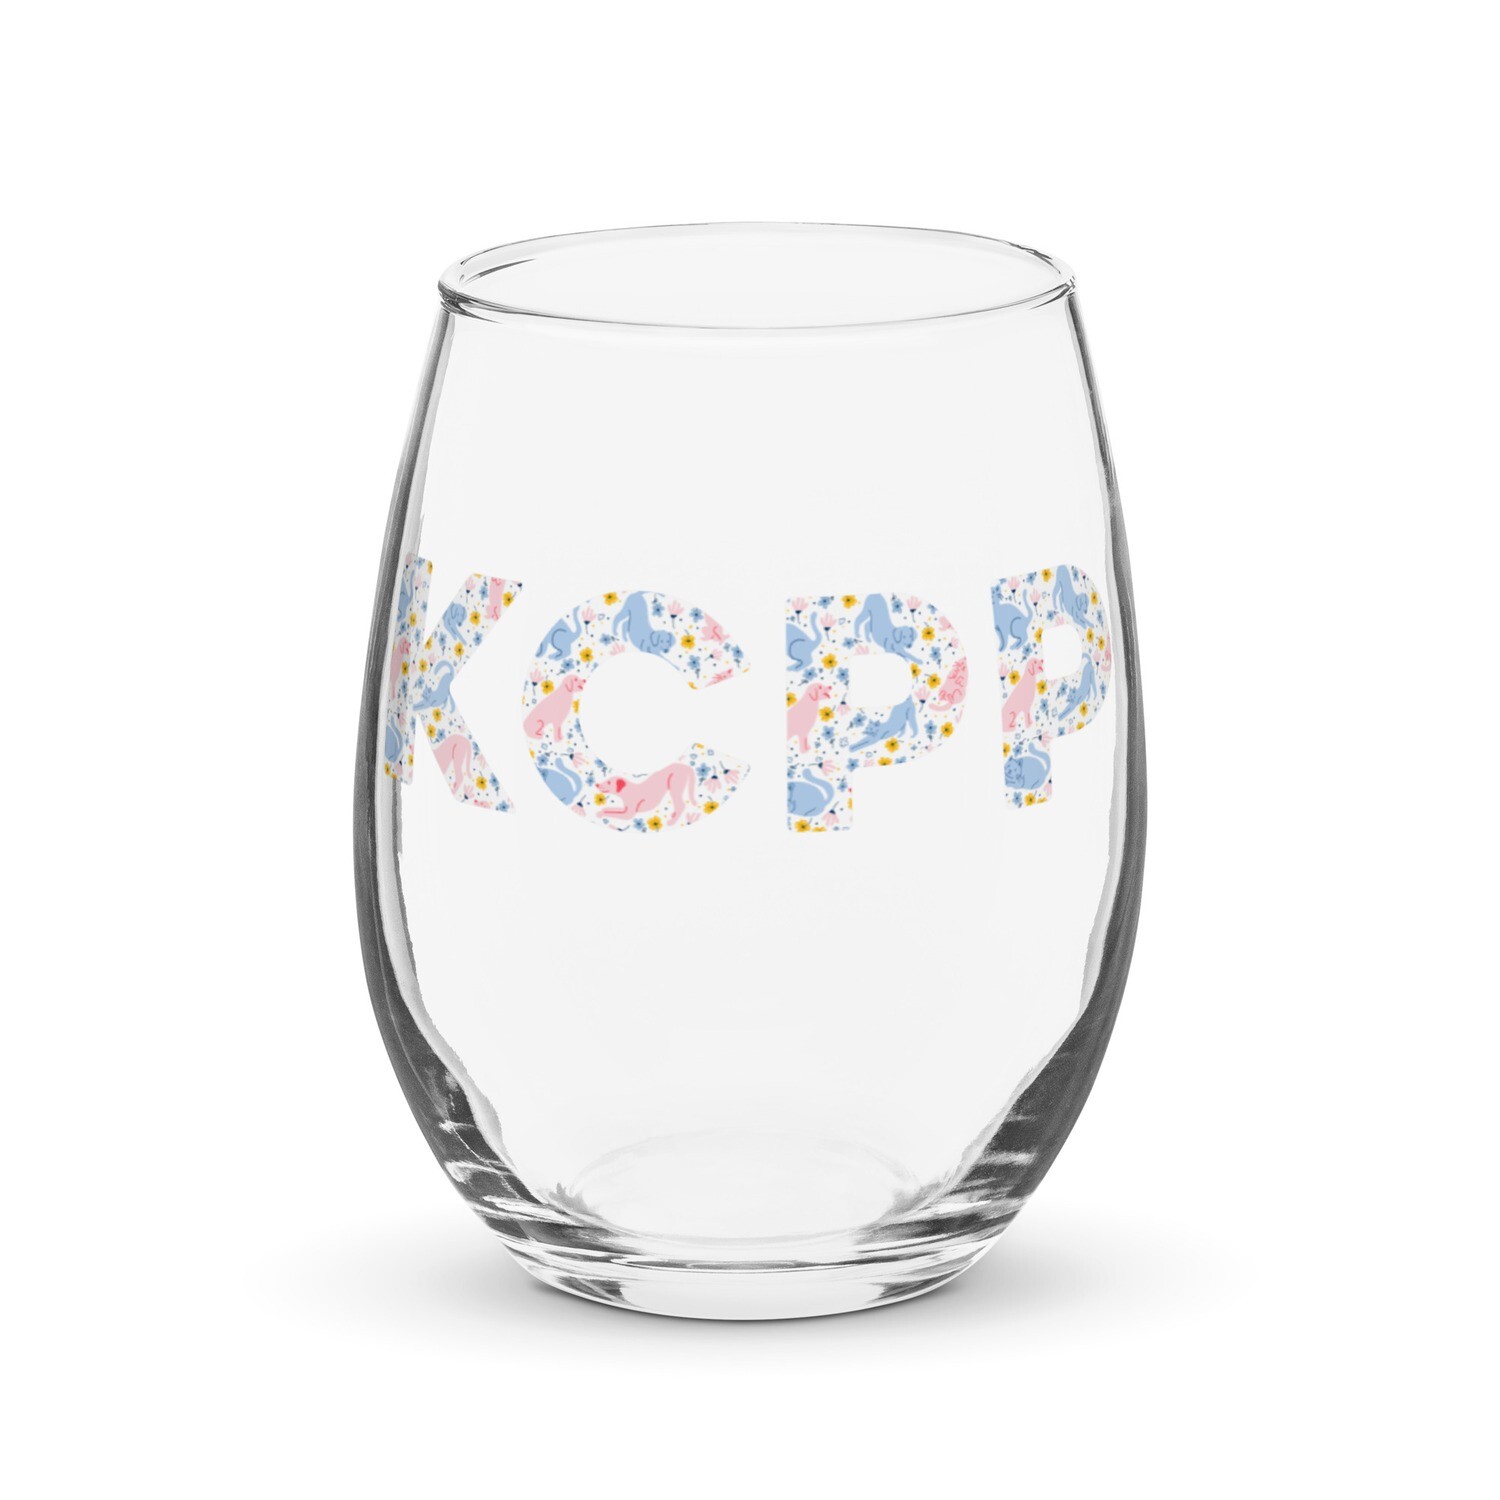 KCPP Block Floral Stemless Wine Glass